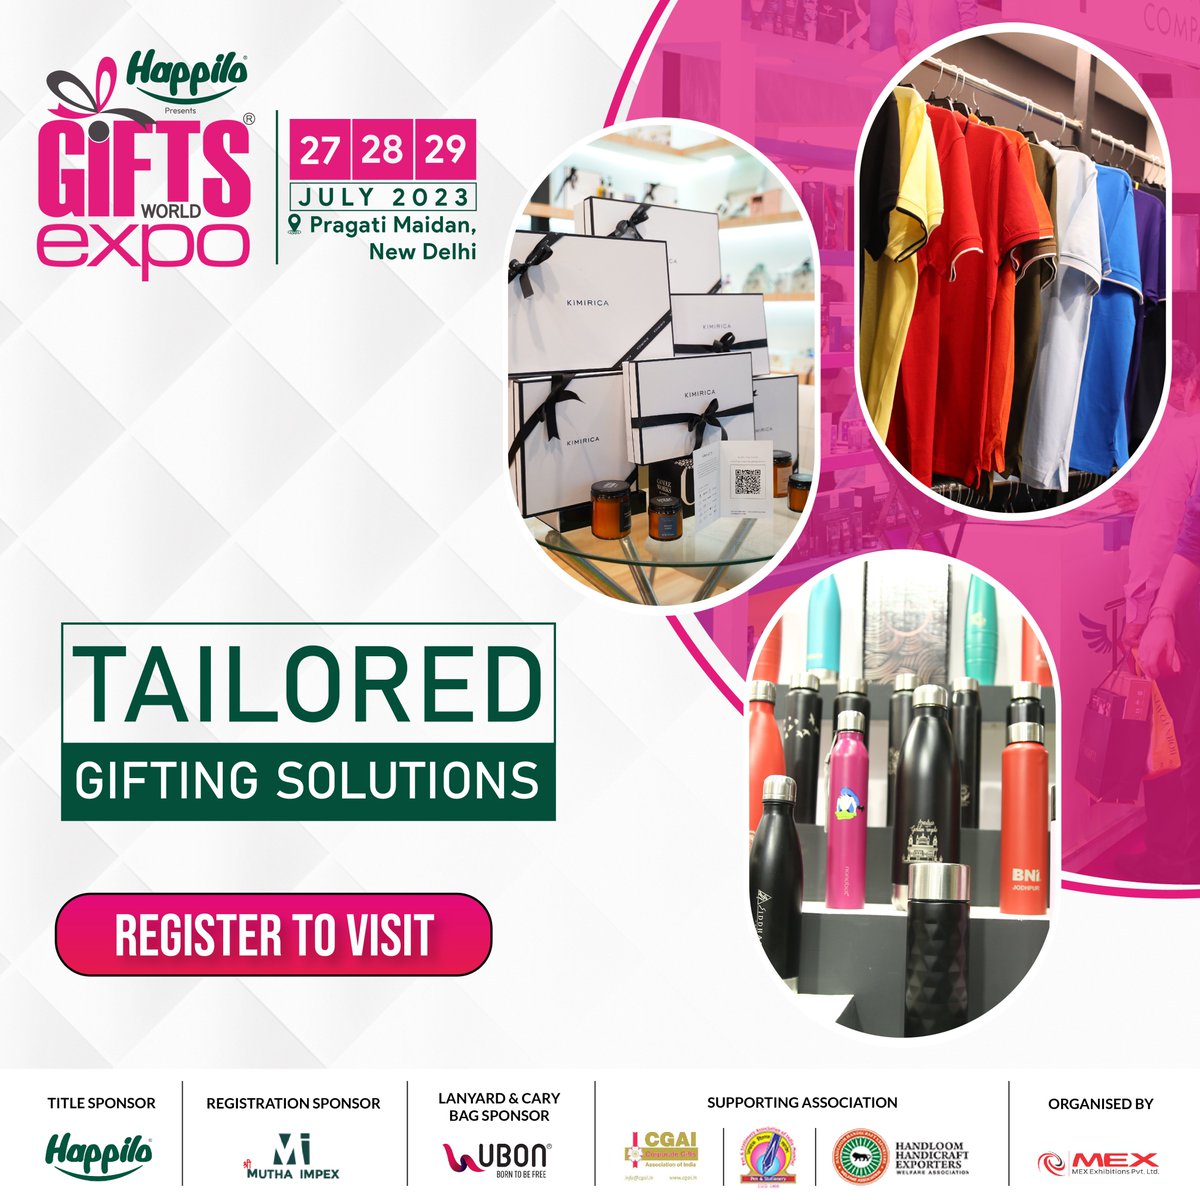 Get #tailored #gifting solutions for your specific needs. Find #products that fit your #brand, #occasion, and target audience.

Register to Visit: bit.ly/3YaCEtA

#giftsworldexpo #electronics #homeappliances #exhibition2023 #pragatimaidan #giftingindustry #business #gift